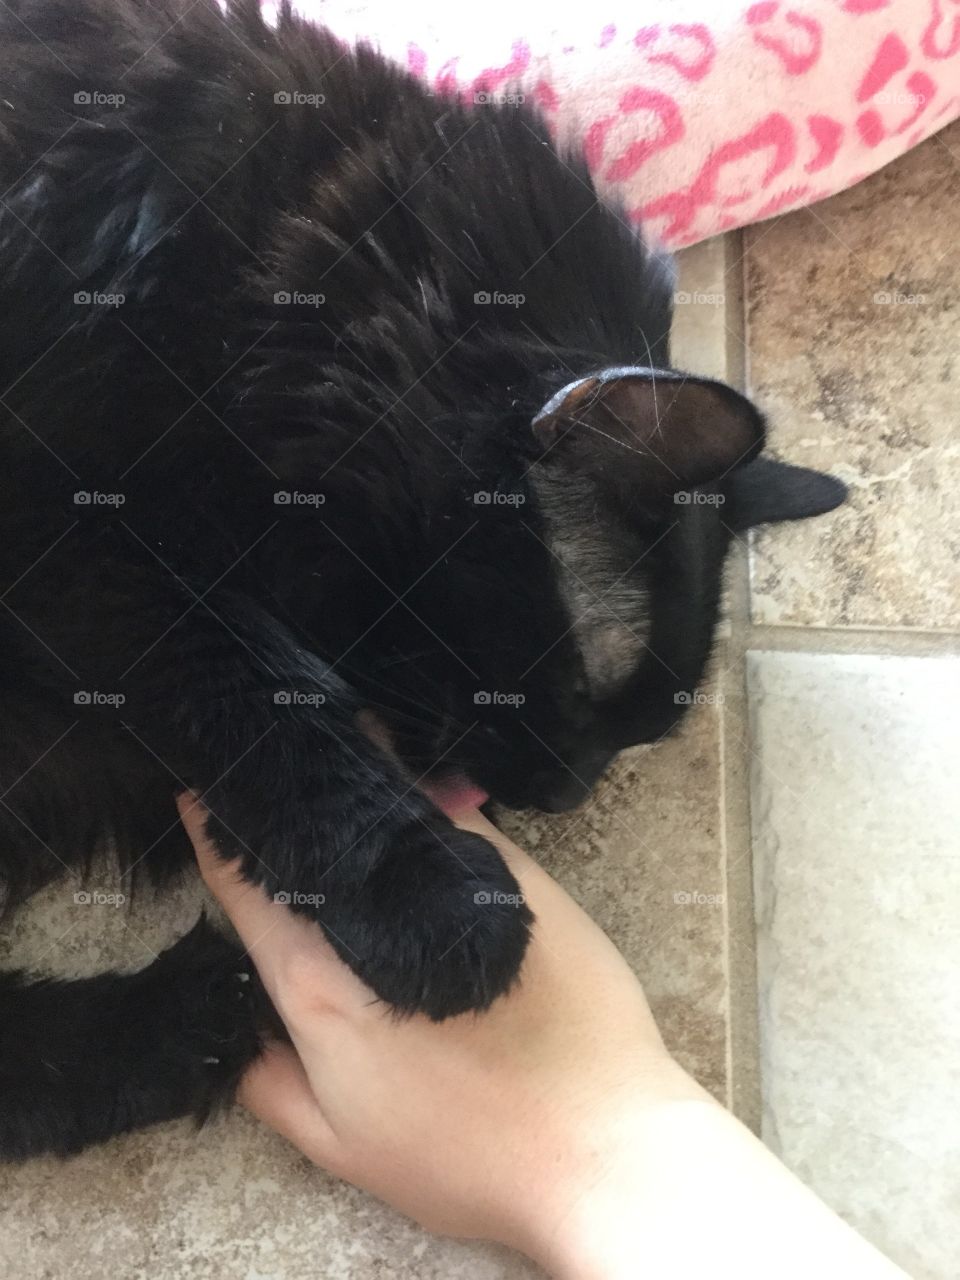 Cat showing love to a person's hand.